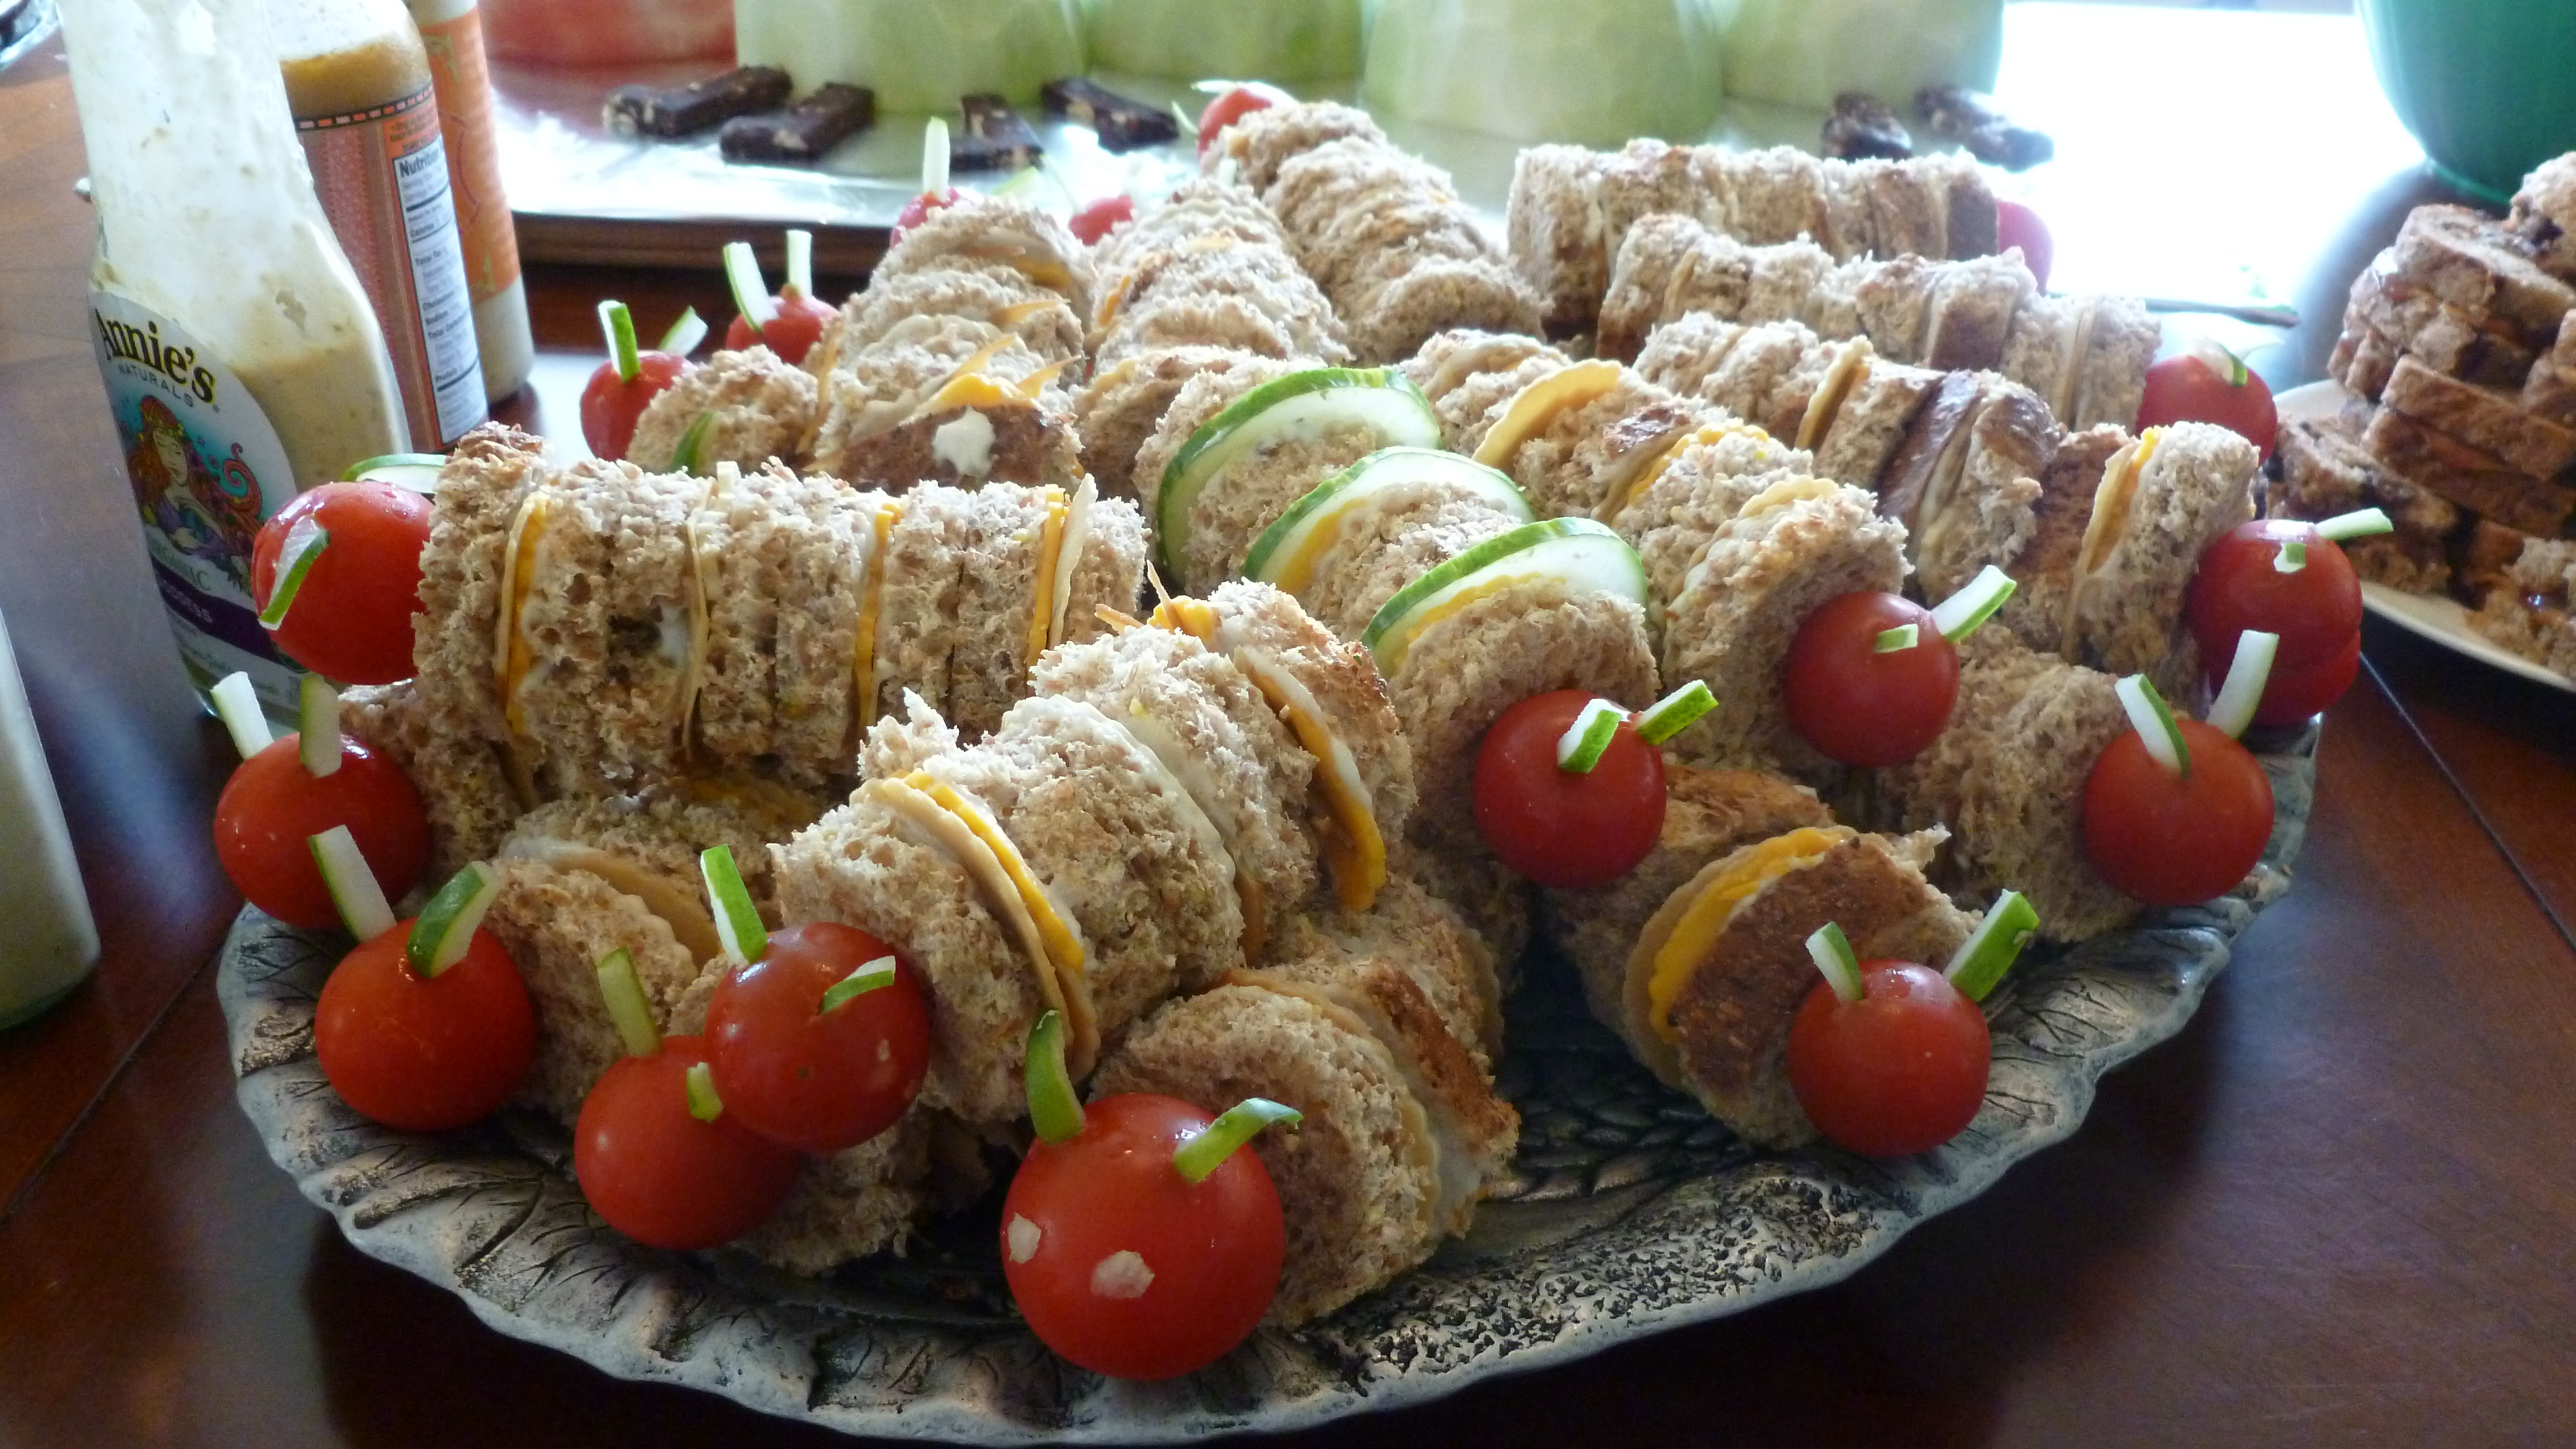 The Very Hungry Caterpillar Sandwiches